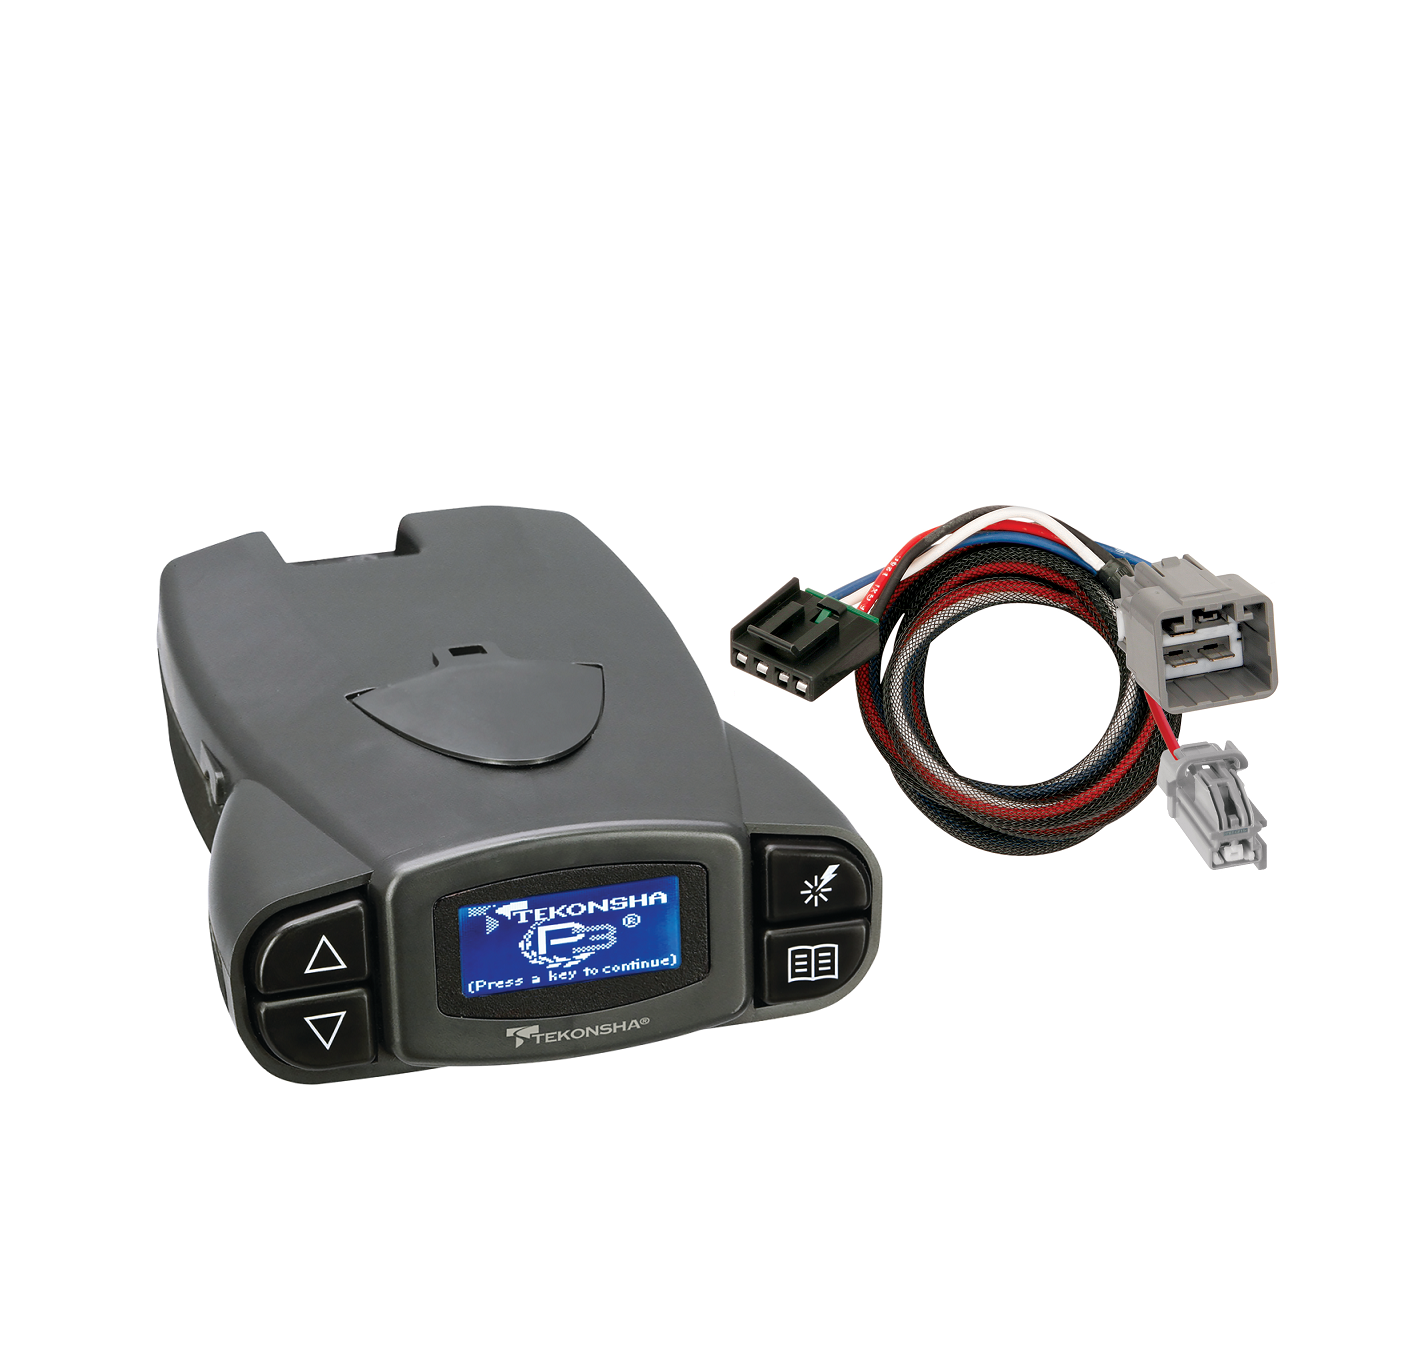 2013-2014 RAM 2500 3023 Tekonsha Prodigy P3 Proportional Brake Controller for Trailers with 1-4 Axles 90195 w/ Plug-N-Play Wire